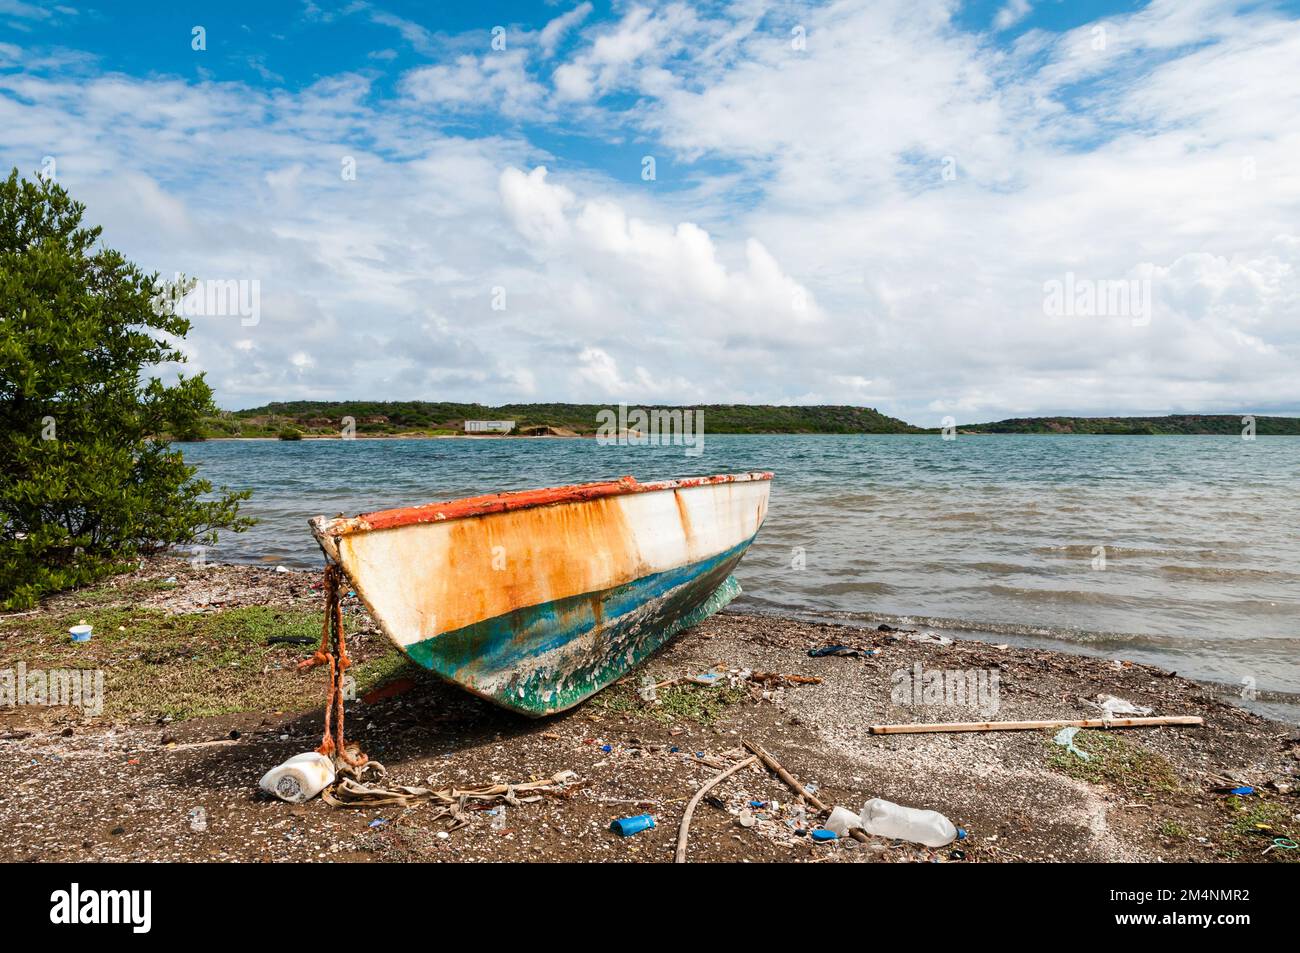 A rusty old boat lies on the beach of St. Joris Bay at the caribbean island Curacao. Stock Photo